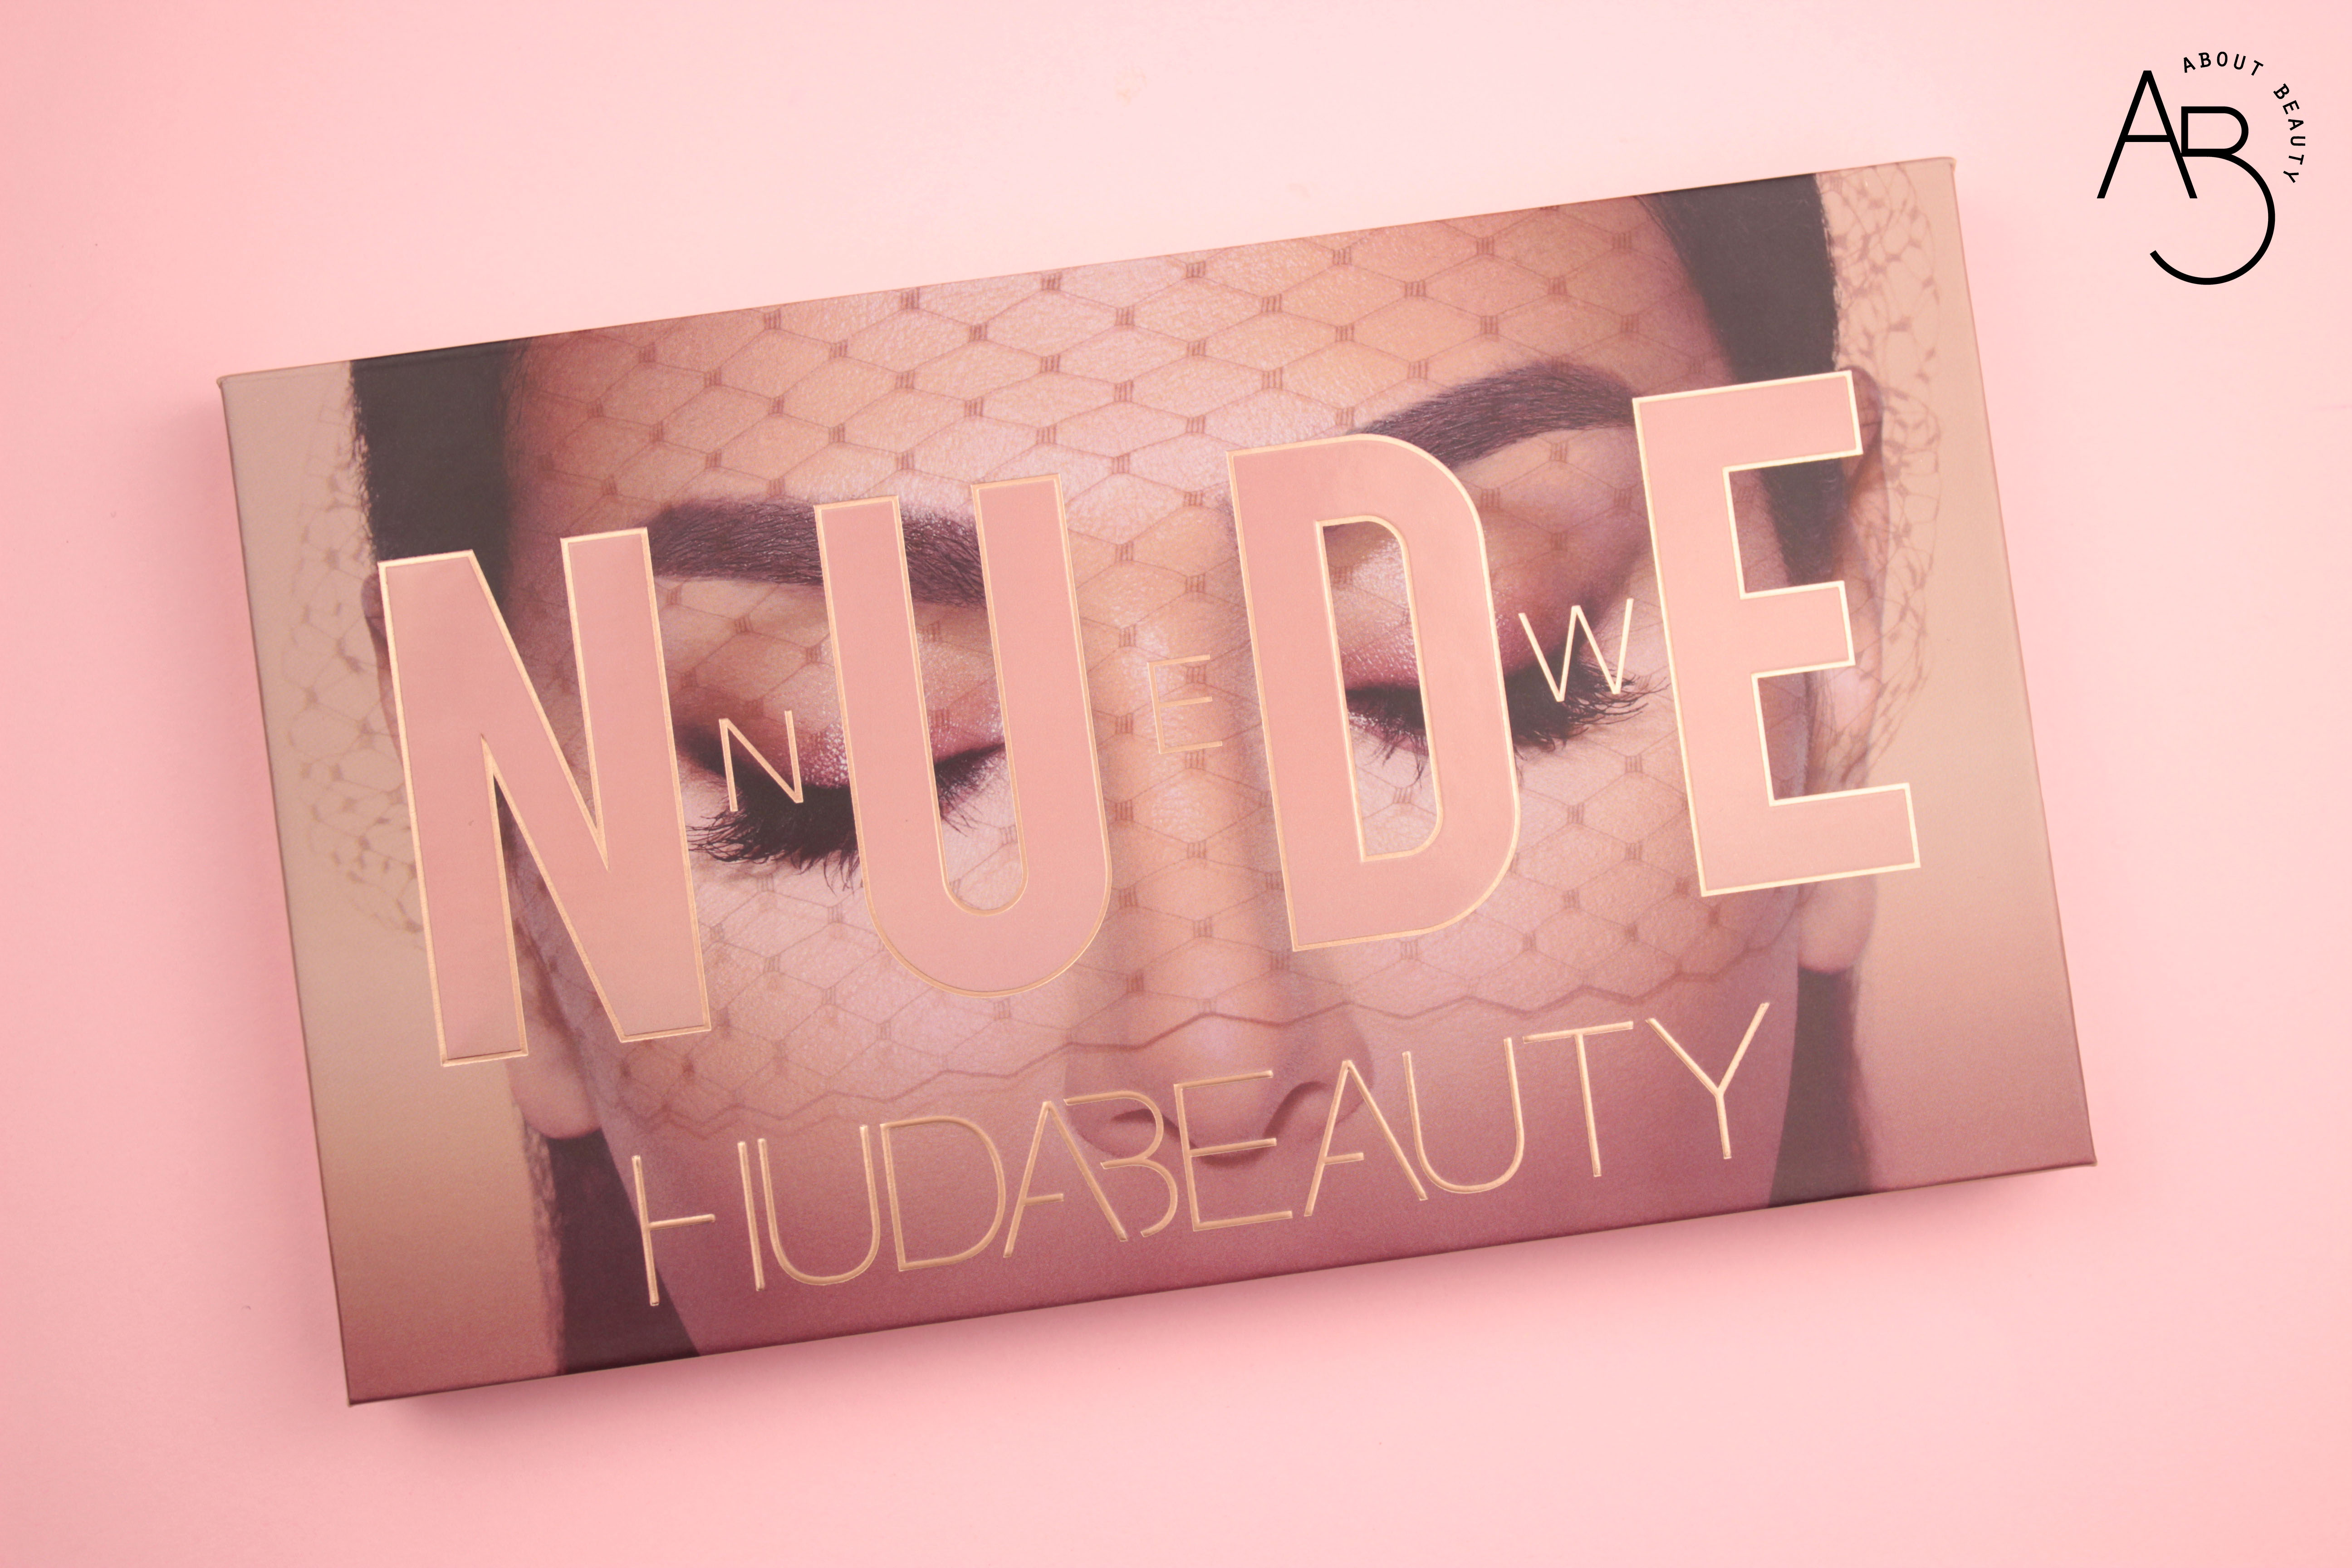 Huda Beauty New Nude Eyeshadow Palette Ombretti - review recensione info prezzo dove acquistare swatch sconto - Packaging frontale